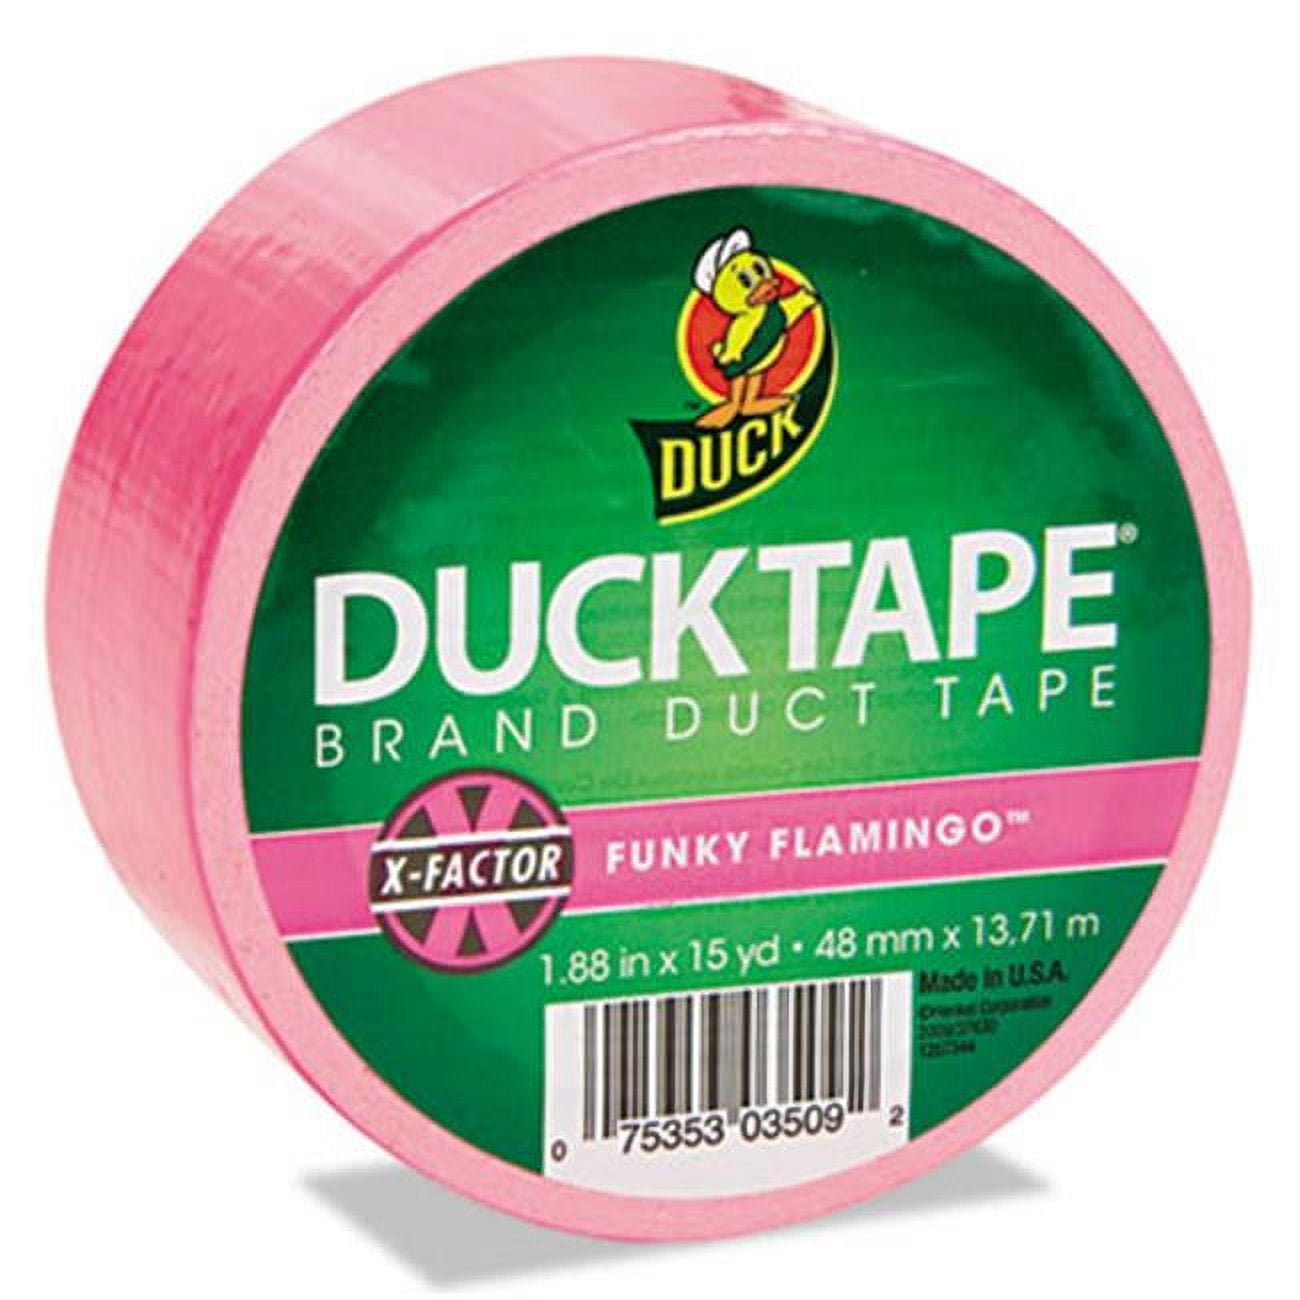 FrogTape 1.88 in. x 60 yd. Green Multi-Surface Painter's Tape 